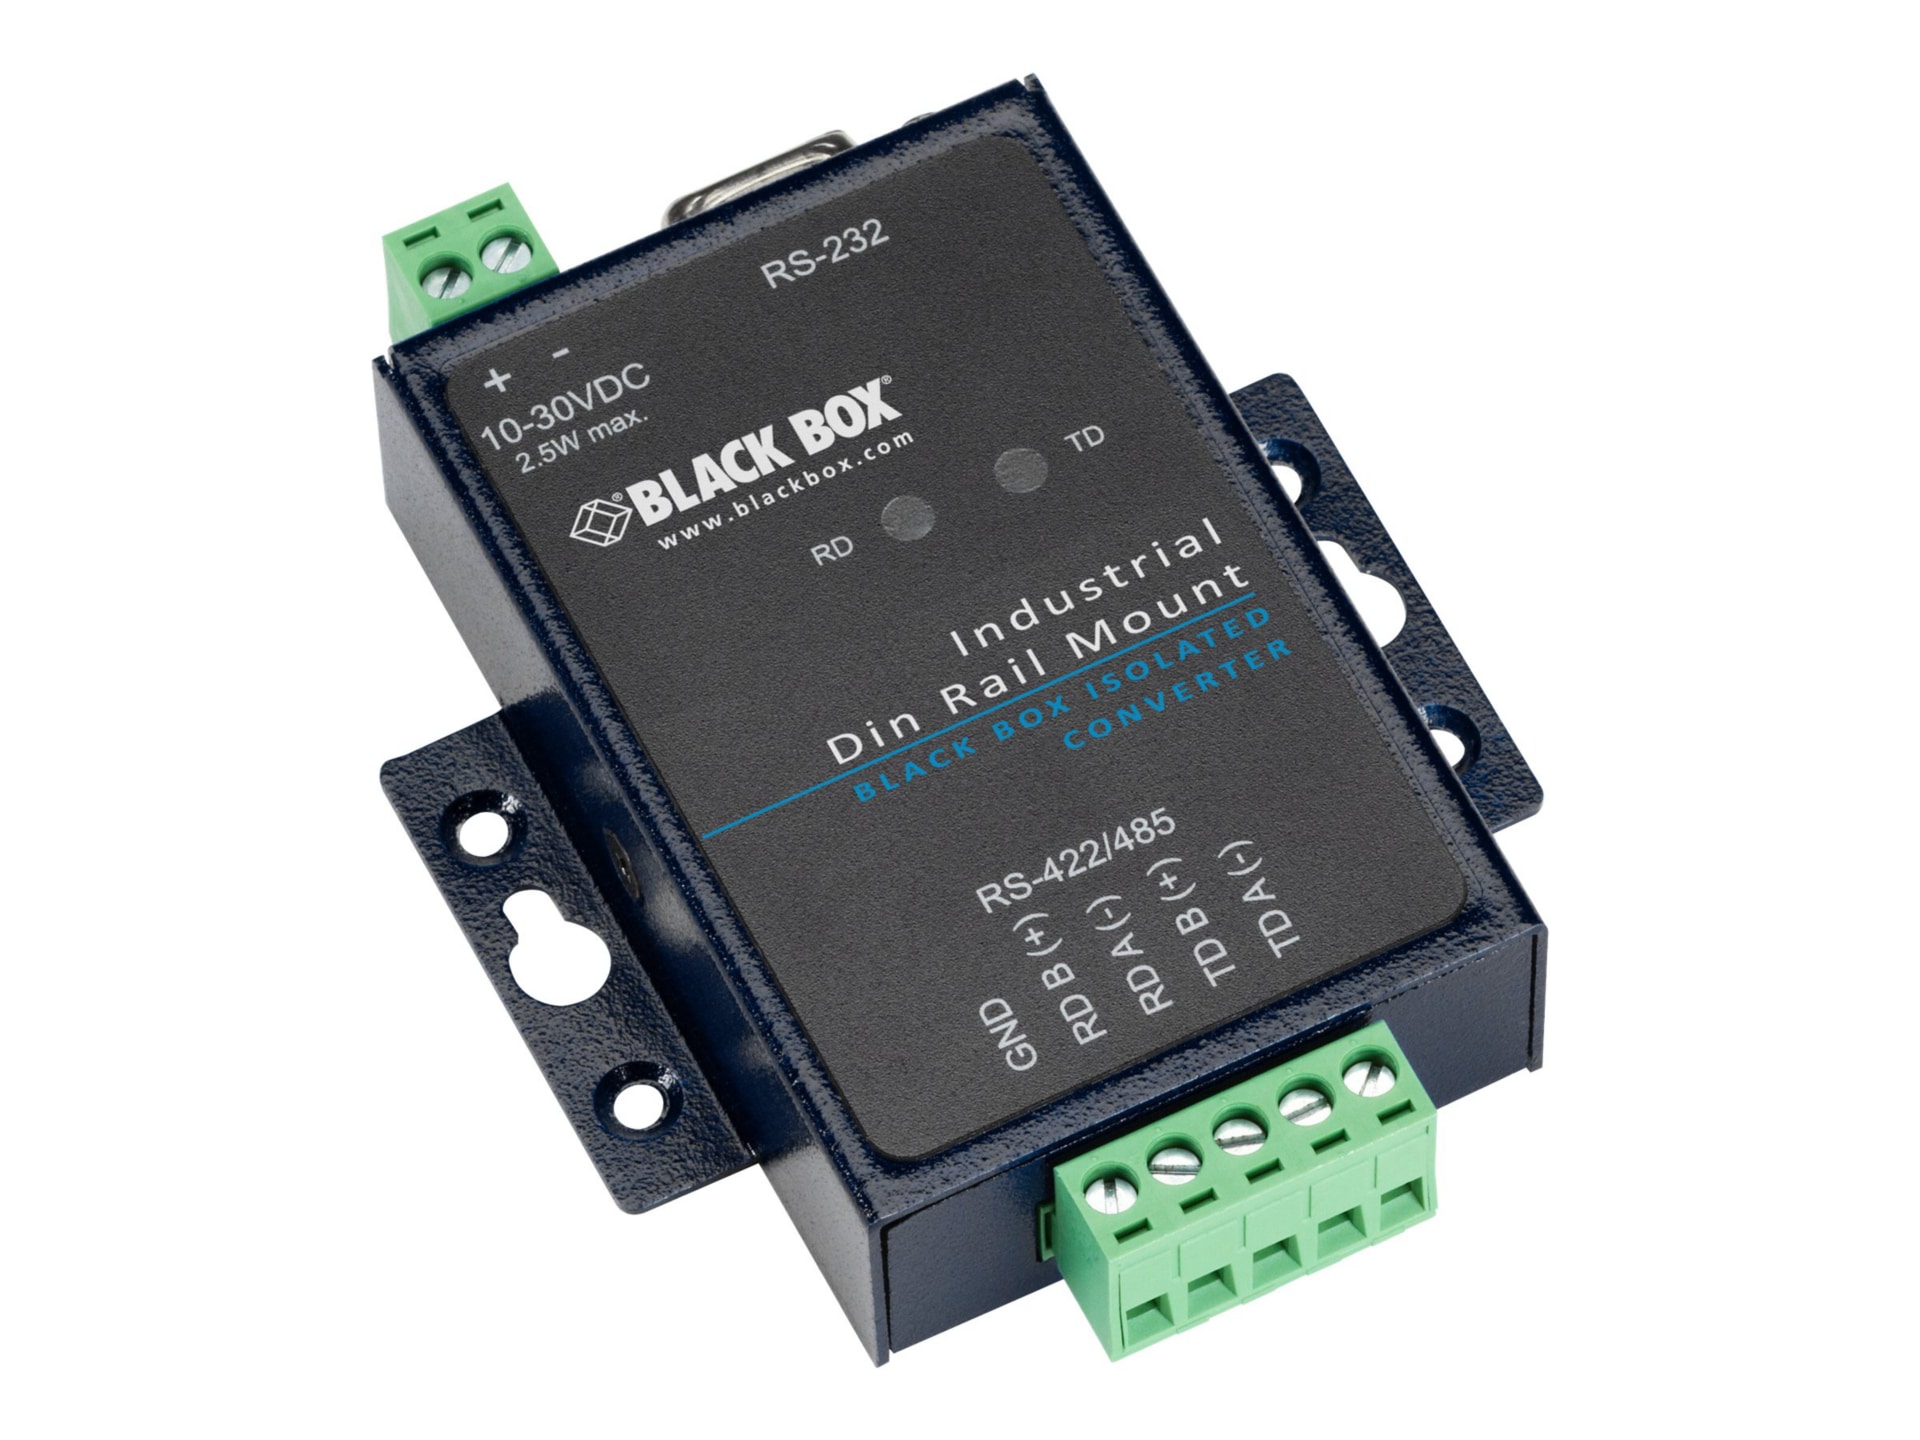 Black Box Industrial RS-232 to RS-485/422 Converter - serial adapter - RS-232 - RS-422/485 - TAA Compliant